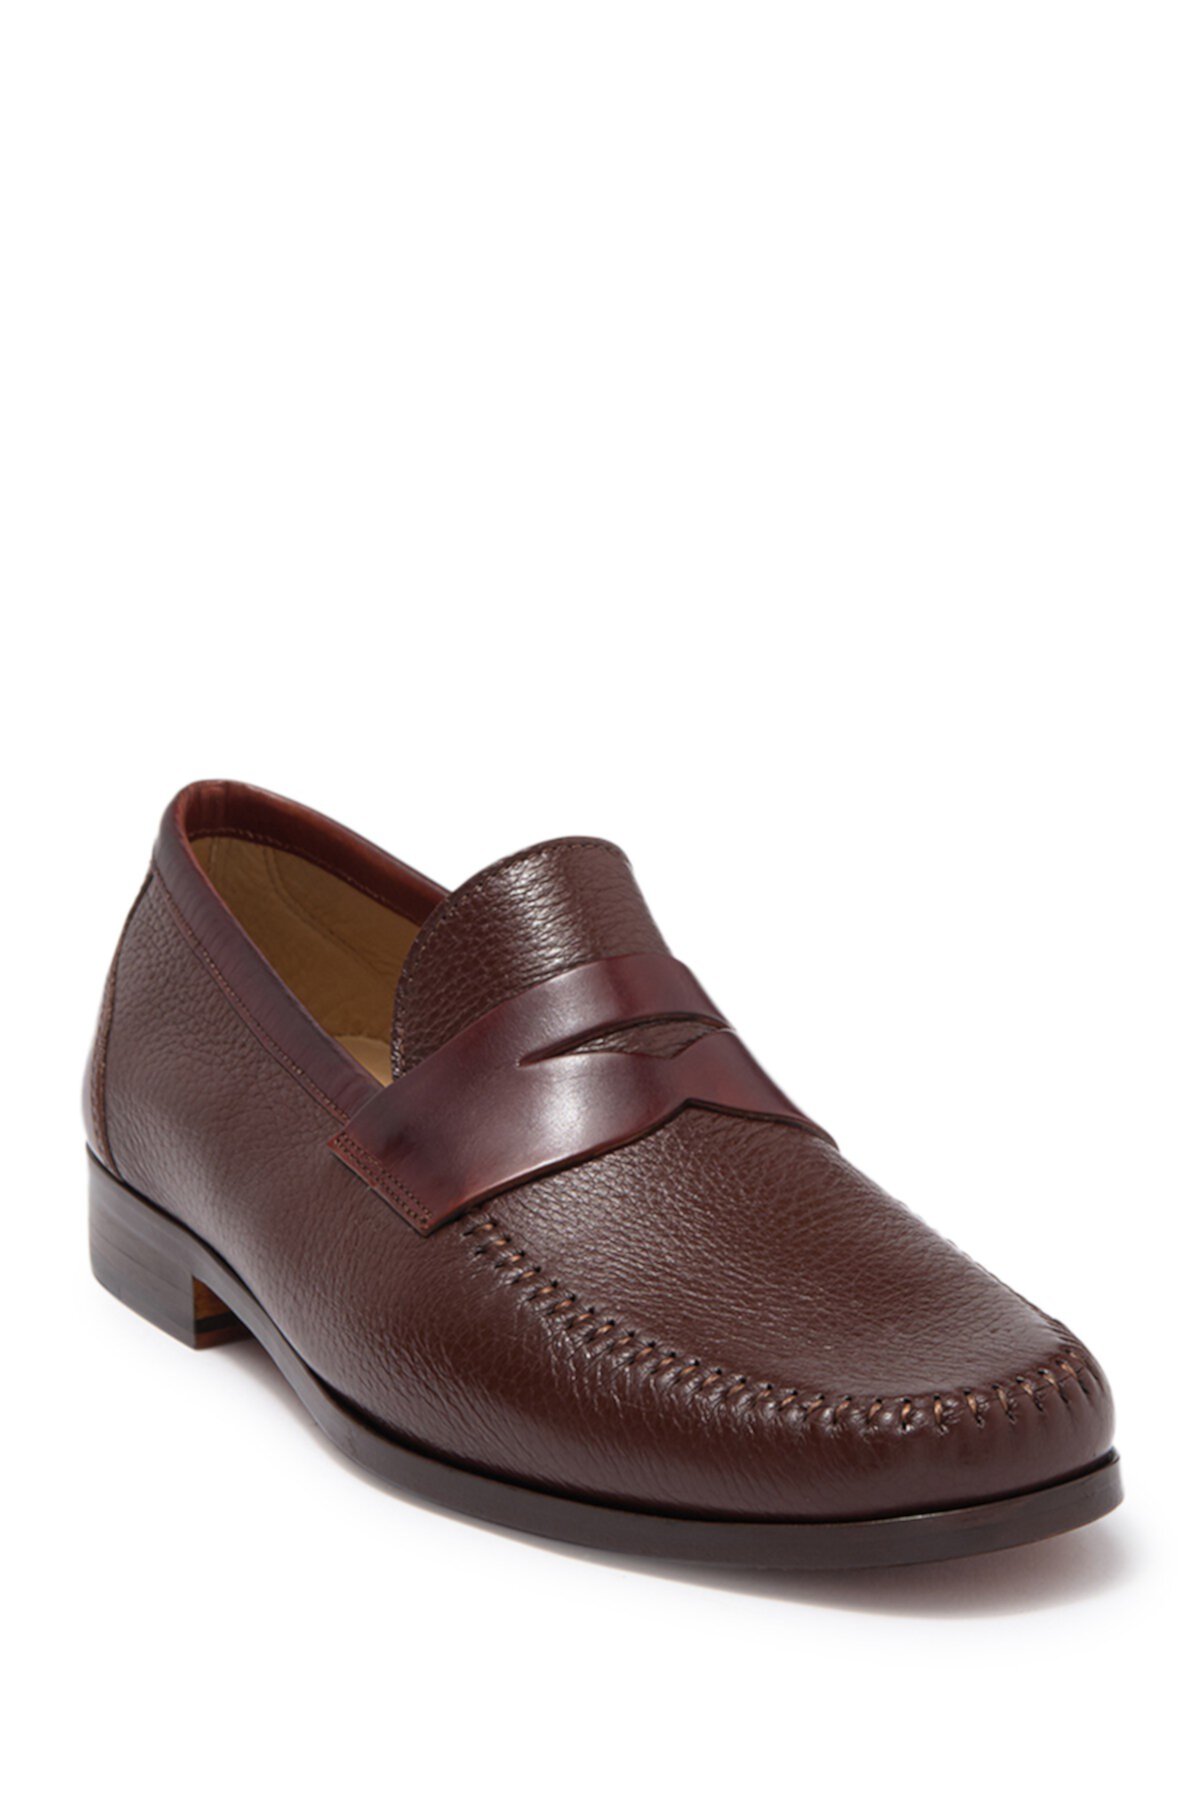 Ramos II Penny Loafer Magnanni